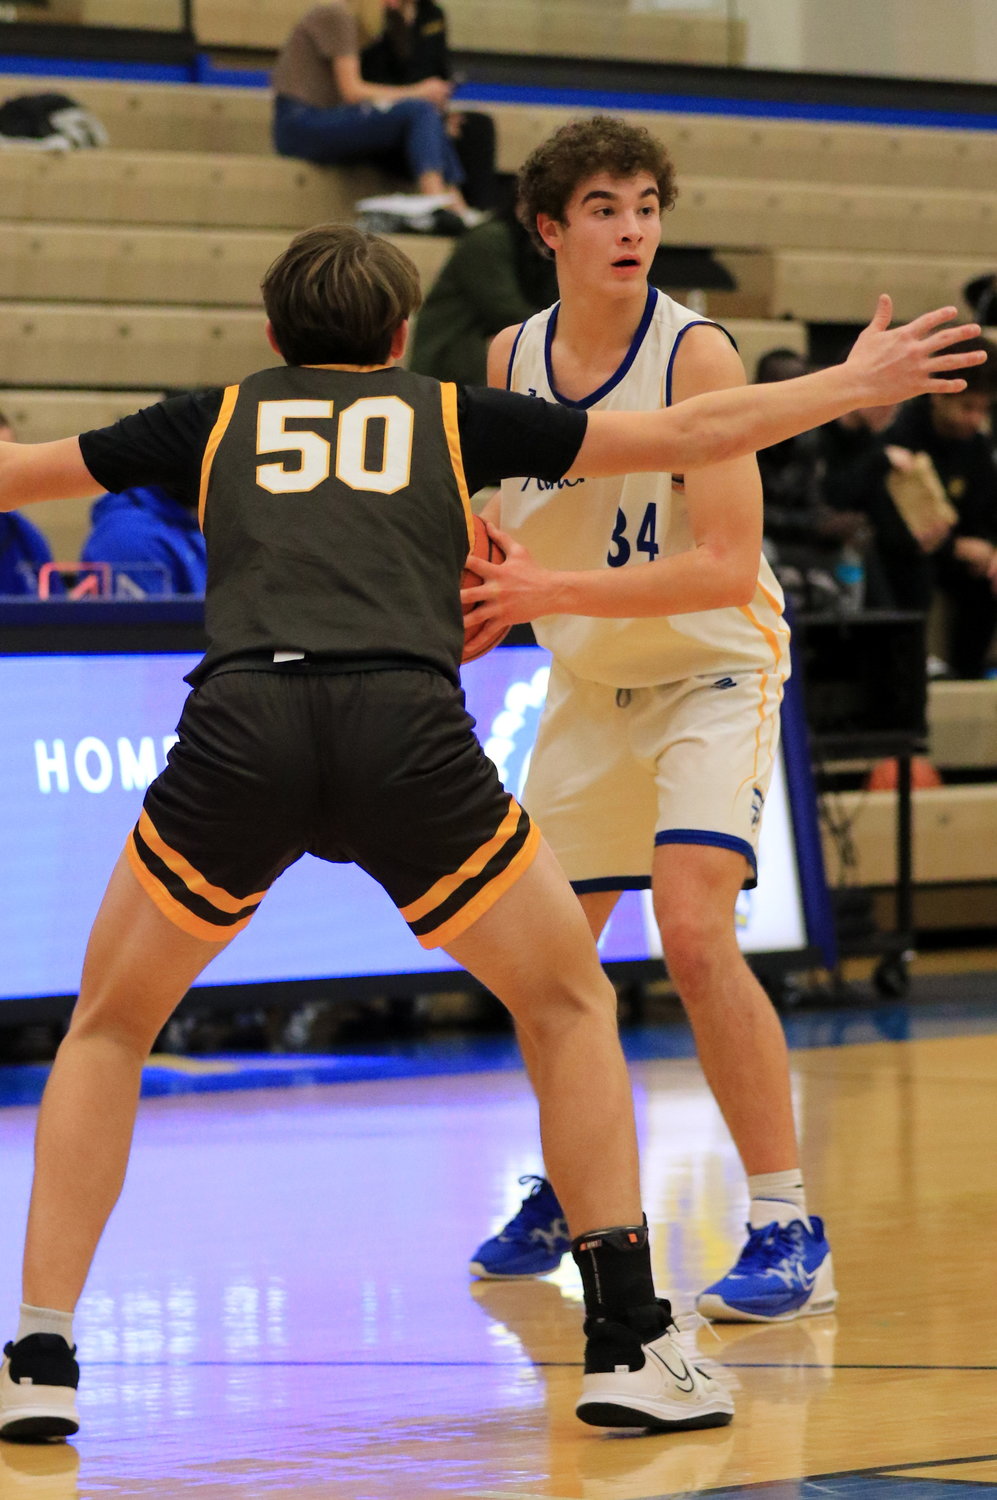 Sophomore big man Alec Saidian led CHS with a double-double scoring 18 points and grabbing 11 rebounds in Crawfordsville’s 57-49 win over Speedway